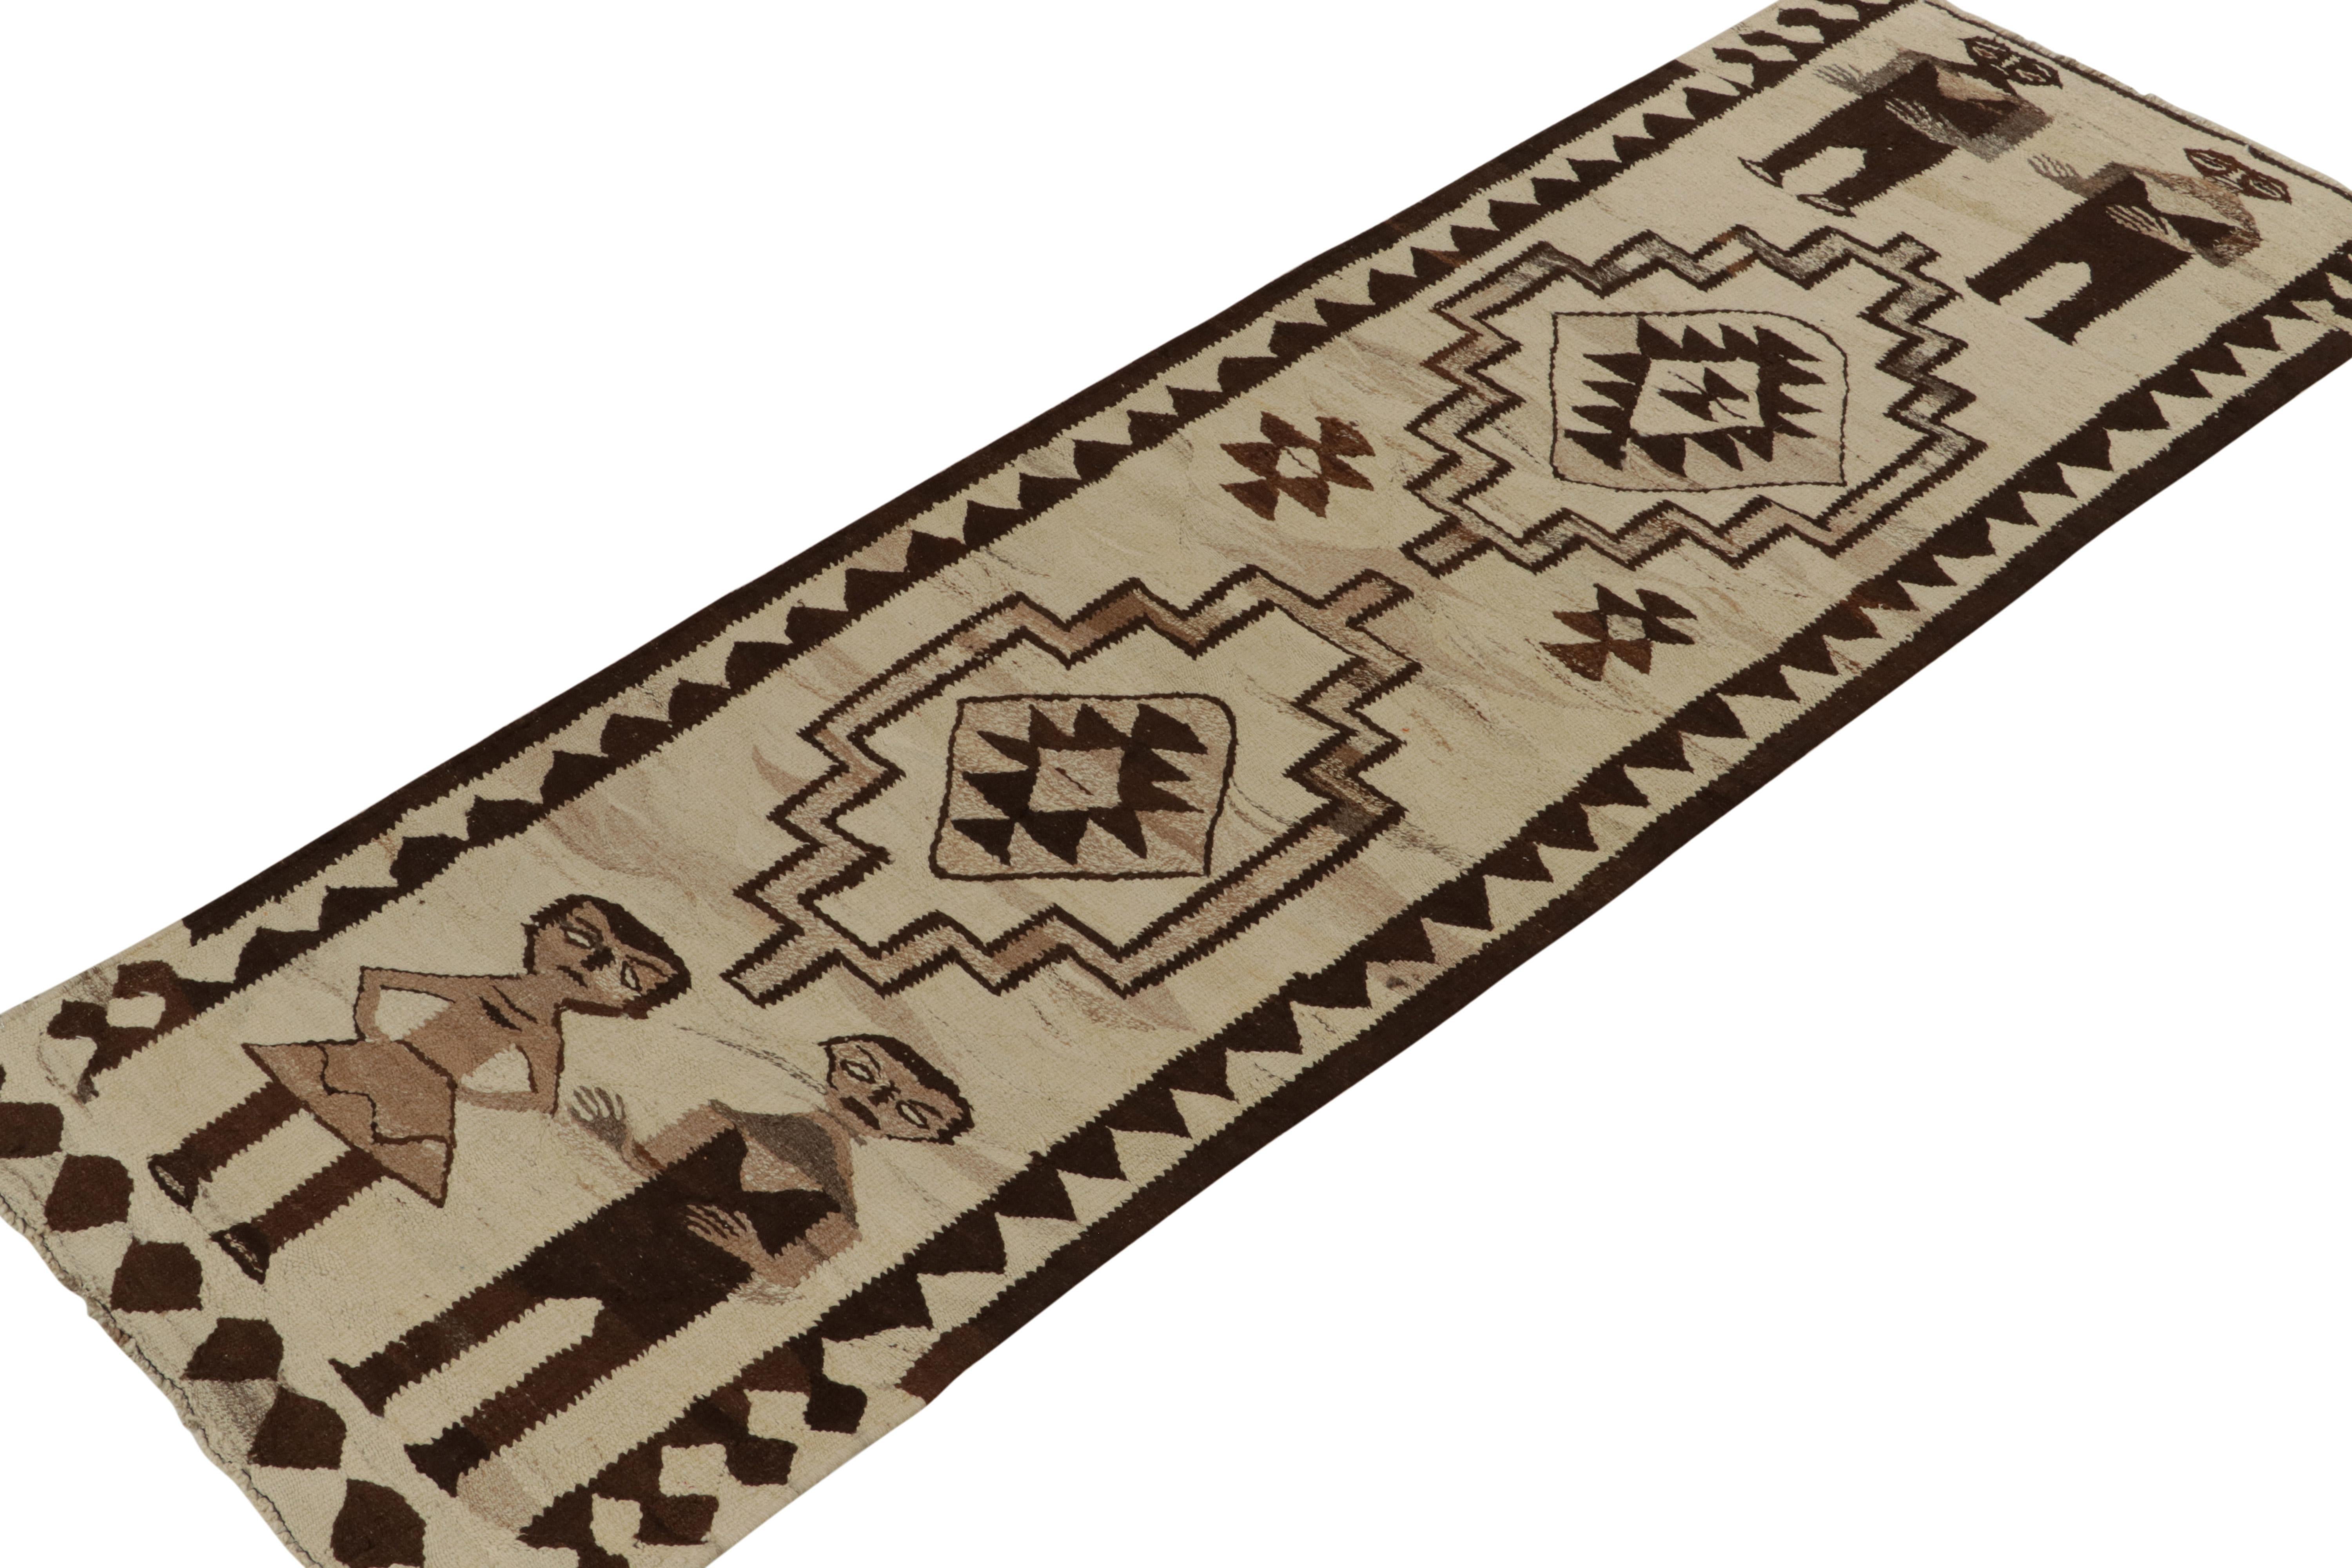 From Rug & Kilim Principal Josh Nazmiyal’s latest acquisitions, a stunning 3x10 vintage kilim runner originating from Turkey circa 1950-1960. 

On the Design: An earthy play of beige-brown tones depict a sharp series of tribal medallions and